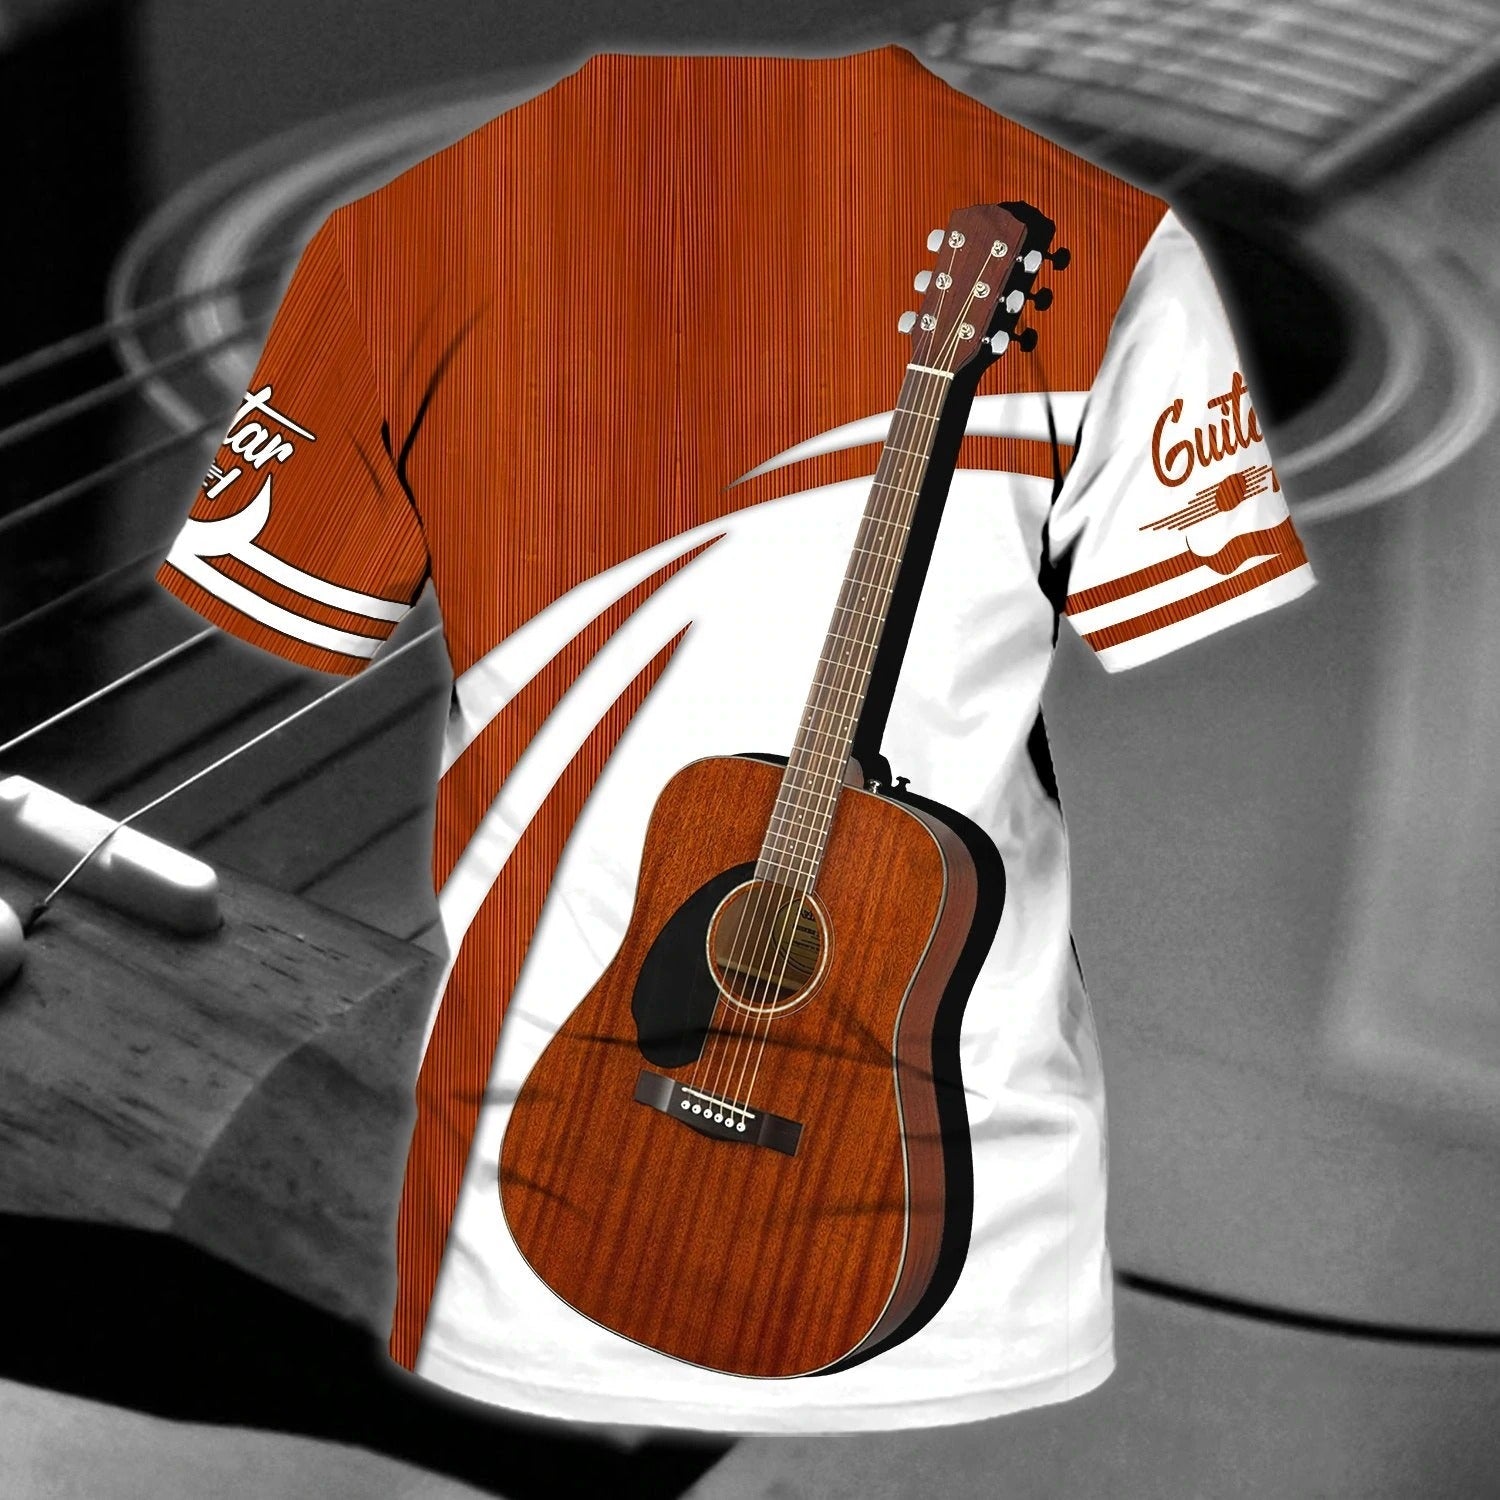 Personalized 3D All Over Printed Guitar Shirts For Man And Woman/ Guitar Shirts/ Gift For Guitar Lovers